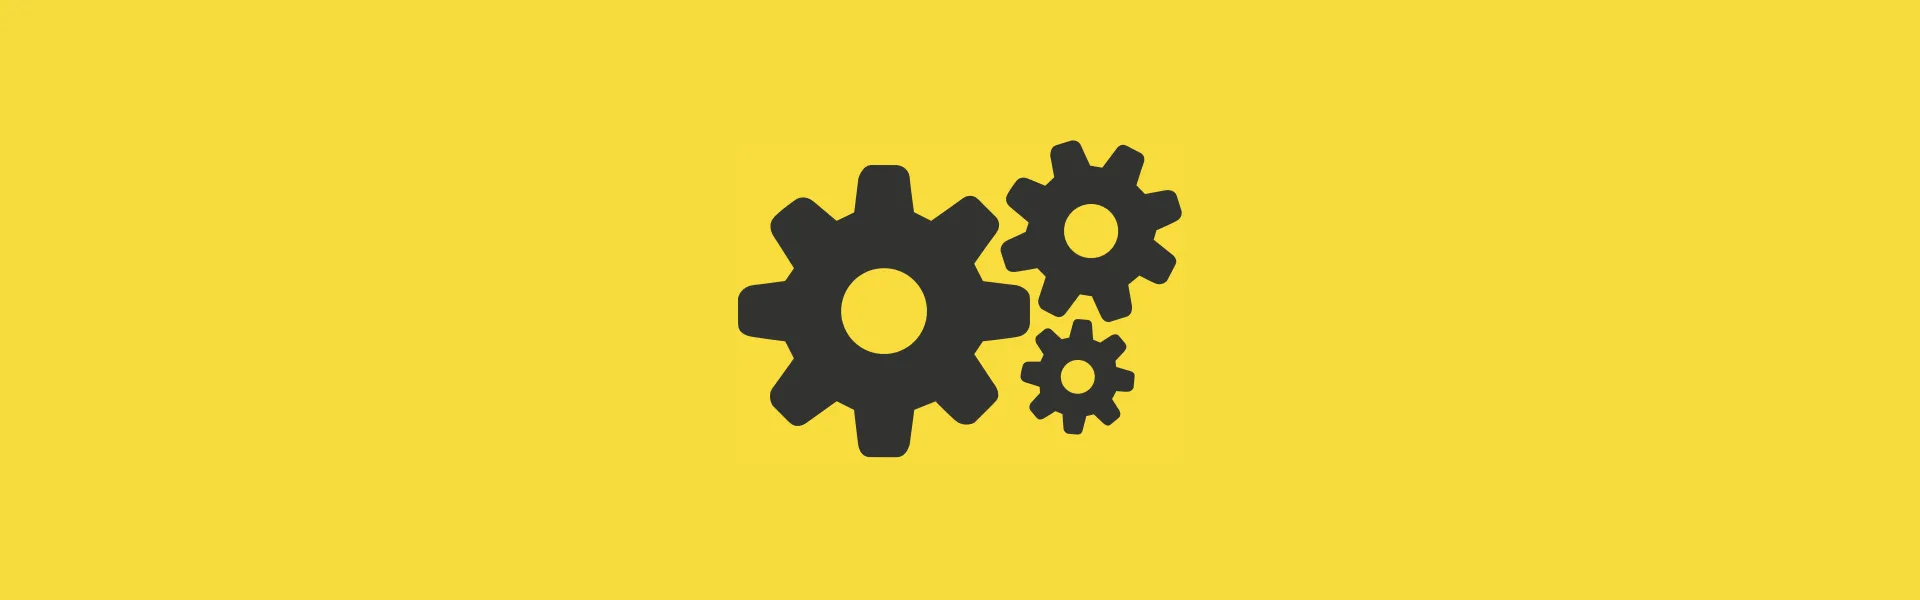 Three cogs on a yellow background, intended to represent the idea of the Service Worker